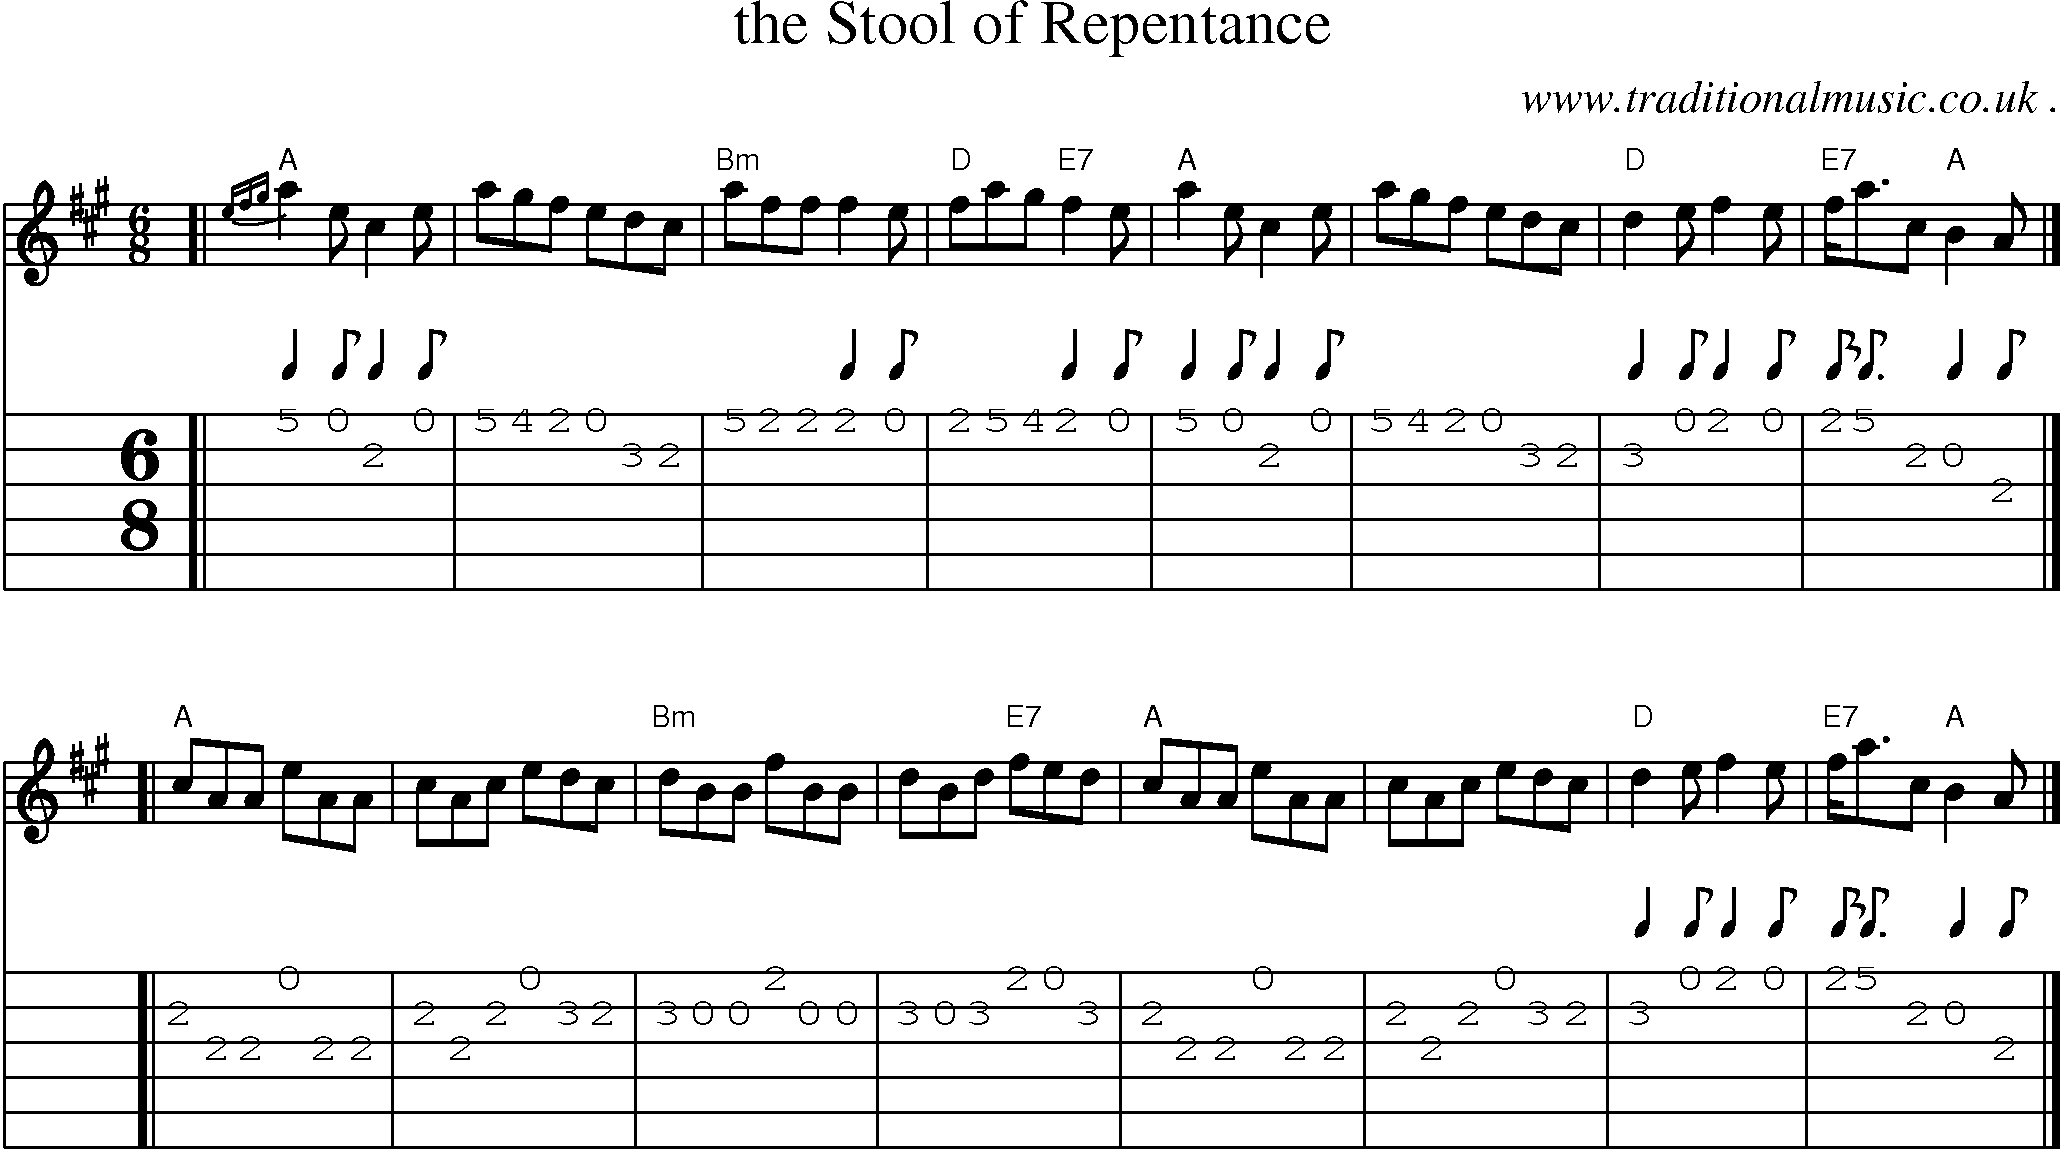 Sheet-music  score, Chords and Guitar Tabs for The Stool Of Repentance